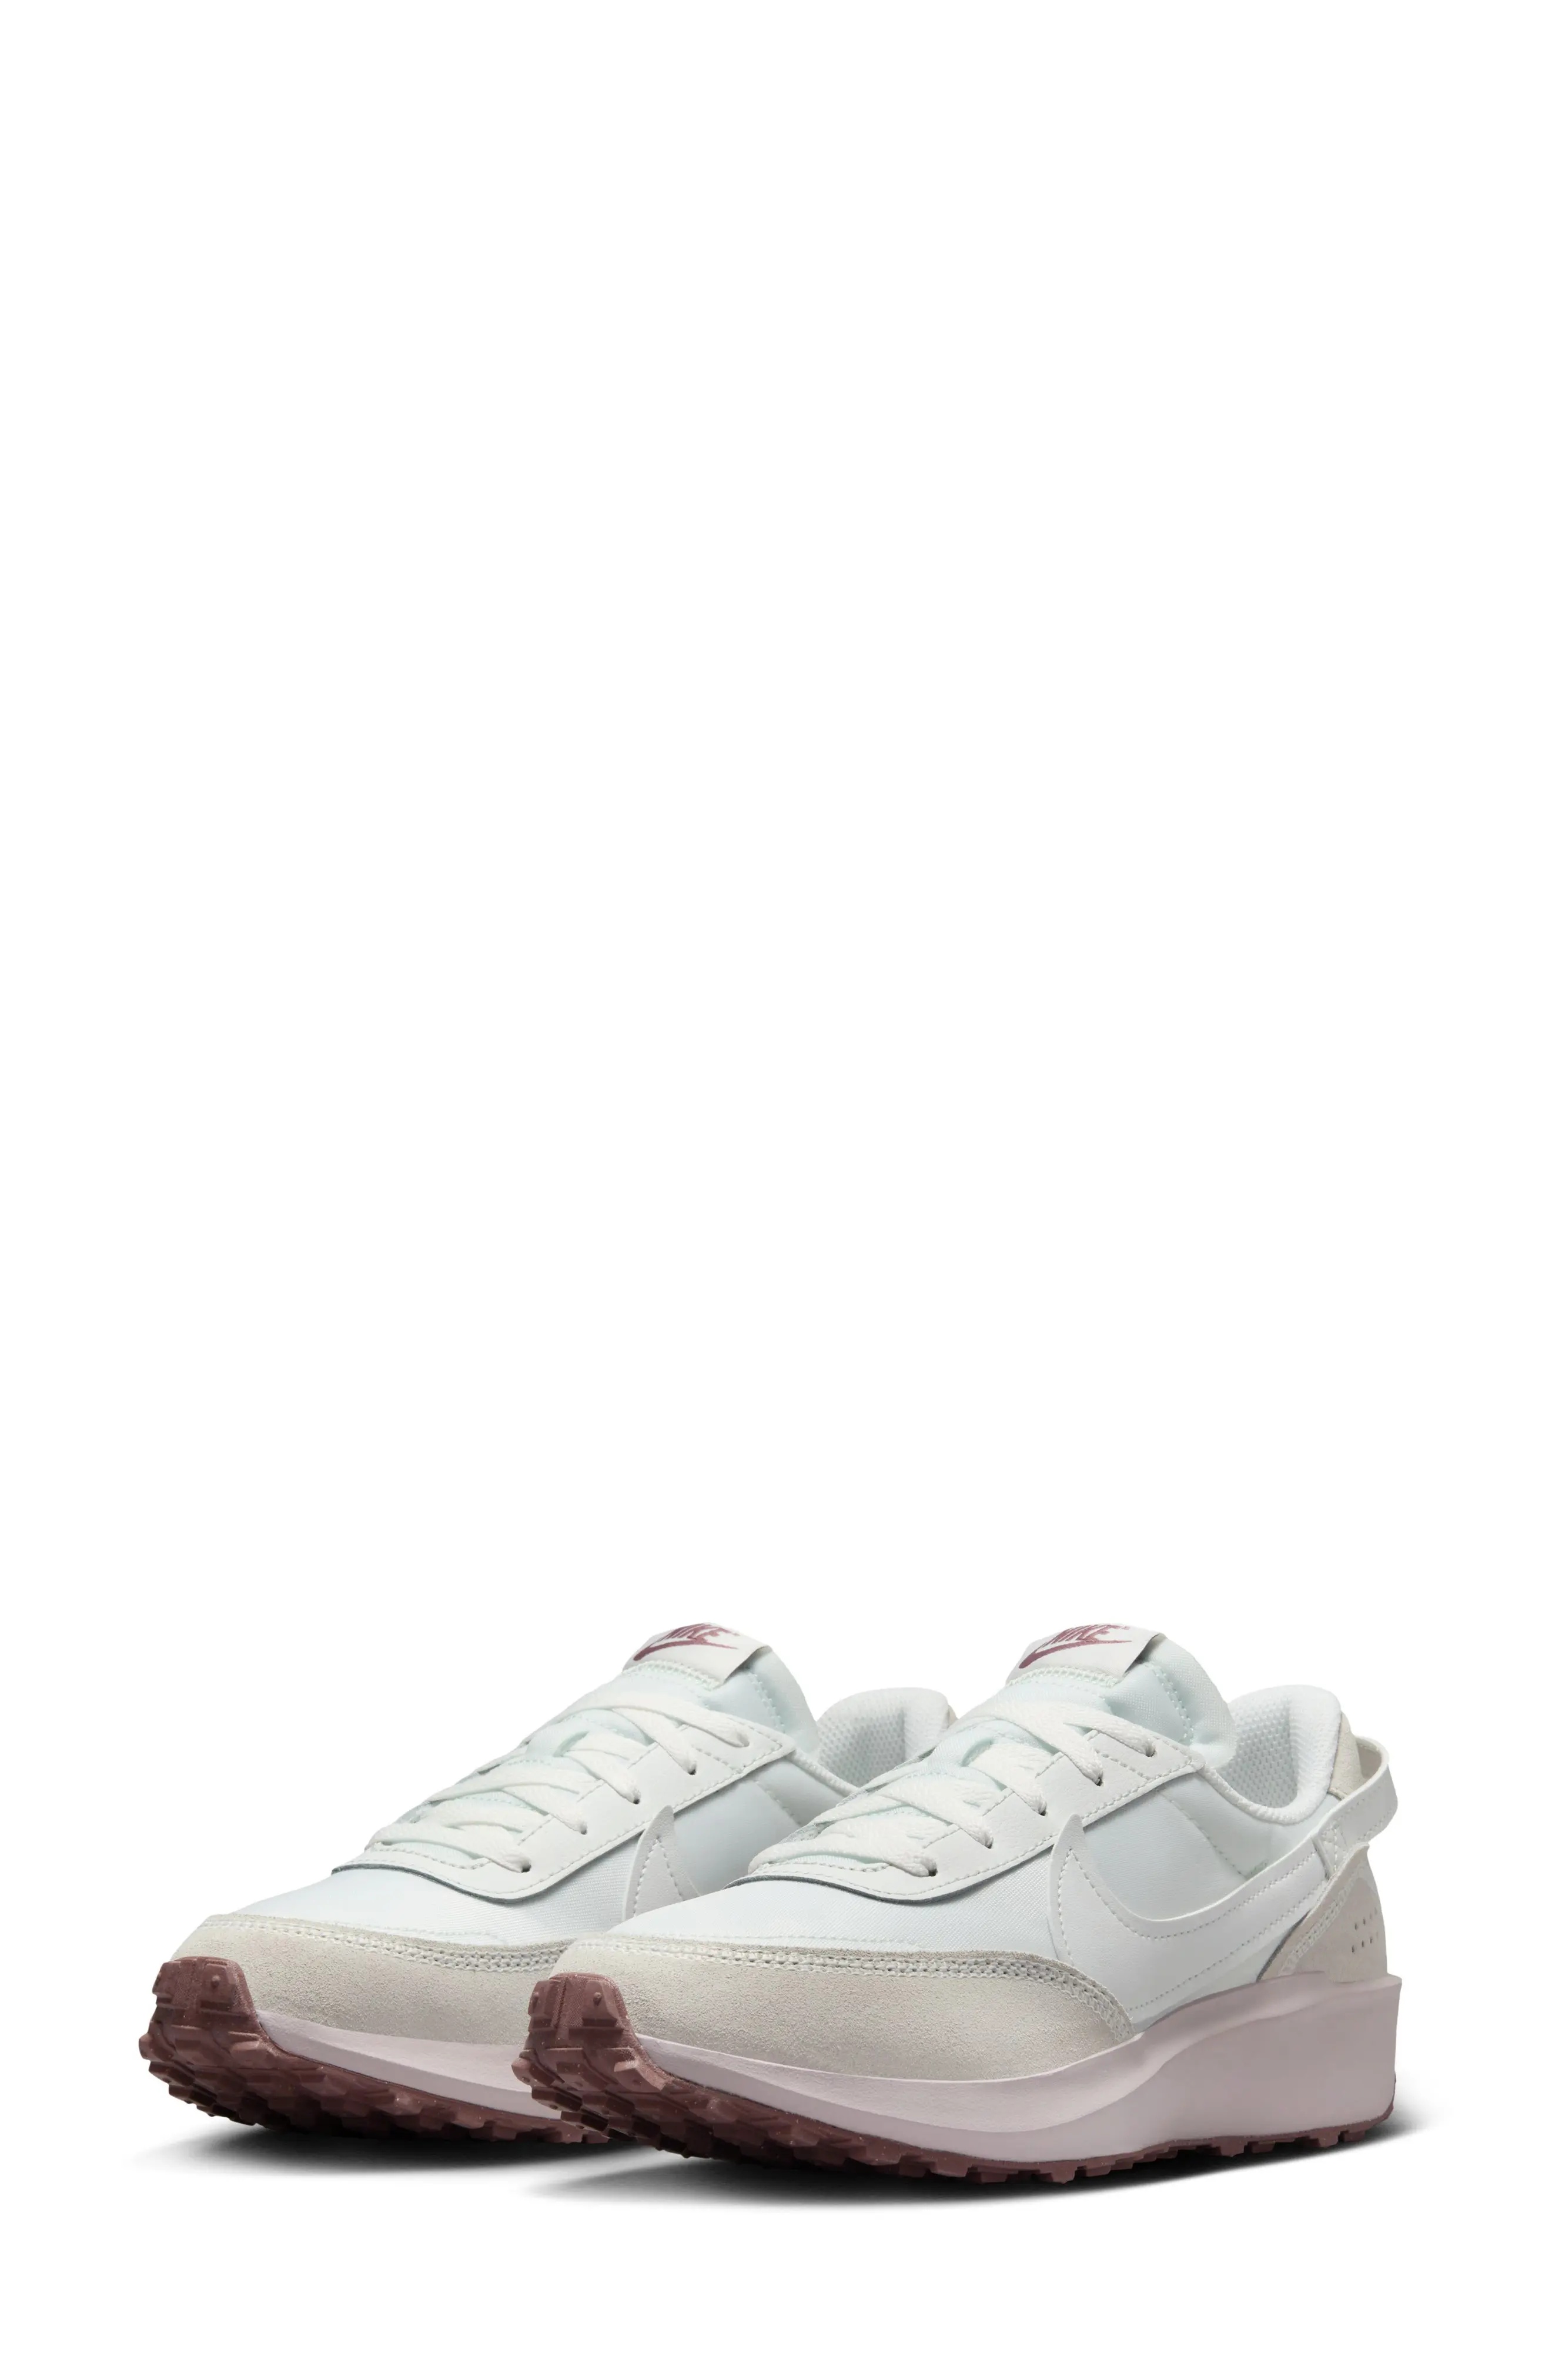 Waffle Debut Sneaker in White/Platinum/Mauve - 2